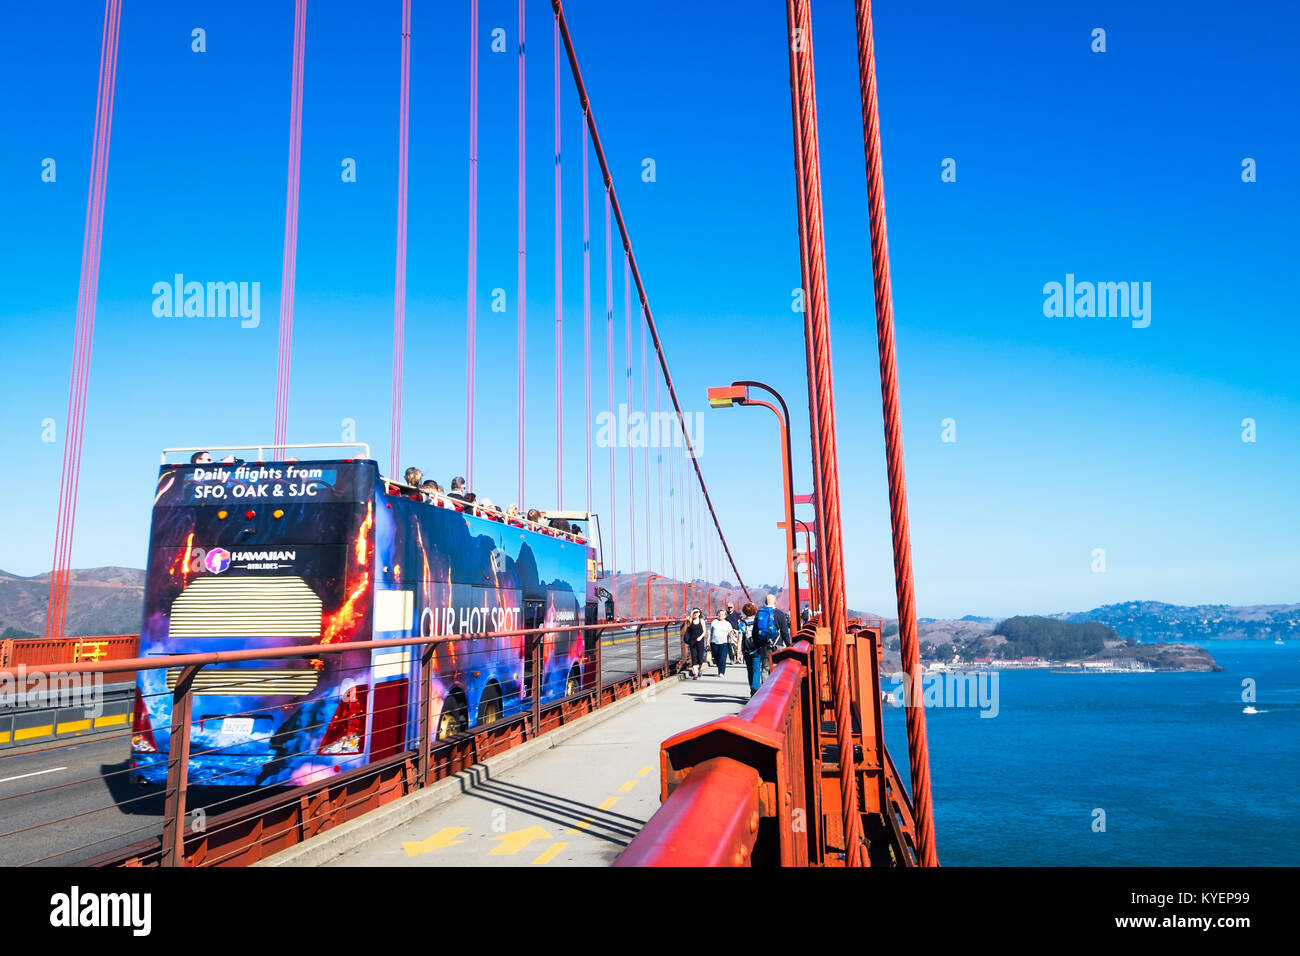 SAN FRANCISCO, CA - OCT 11, 2015: Double decker tour bus driving on the Golden Gate Bridge and people on the pedestrian walkway. Sunny day with blue s Stock Photo